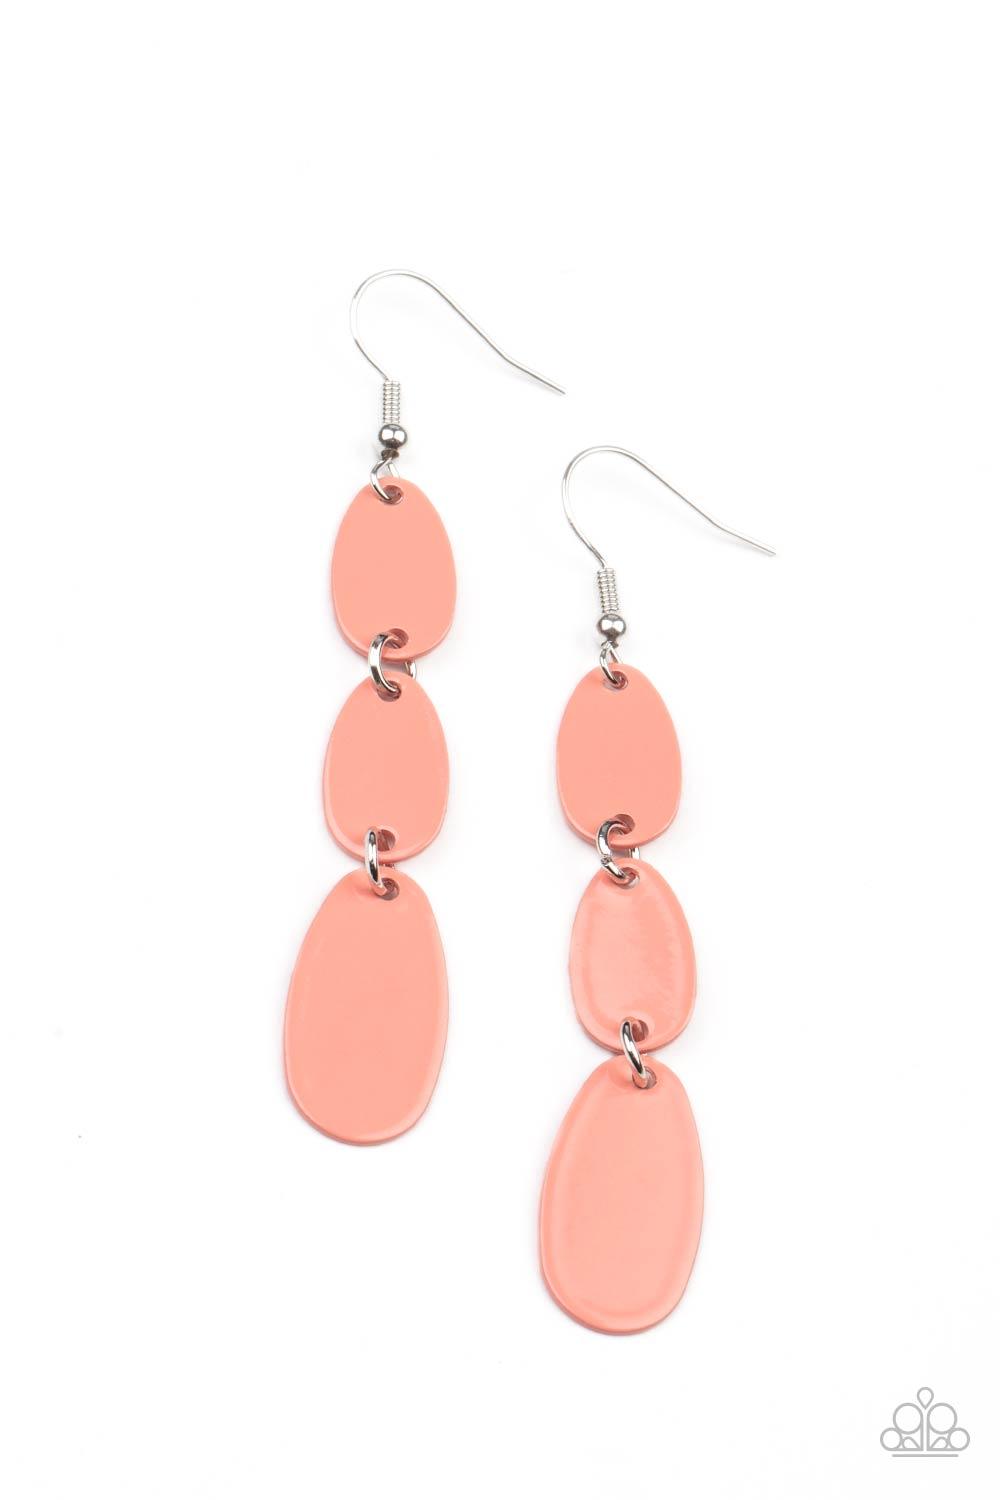 Paparazzi Accessories Rainbow Drops - Orange Painted in a shiny Burnt Coral finish, lengthened oval frames drip from the ear, linking into a colorful lure. Earring attaches to a standard fishhook fitting. Sold as one pair of earrings. Earrings